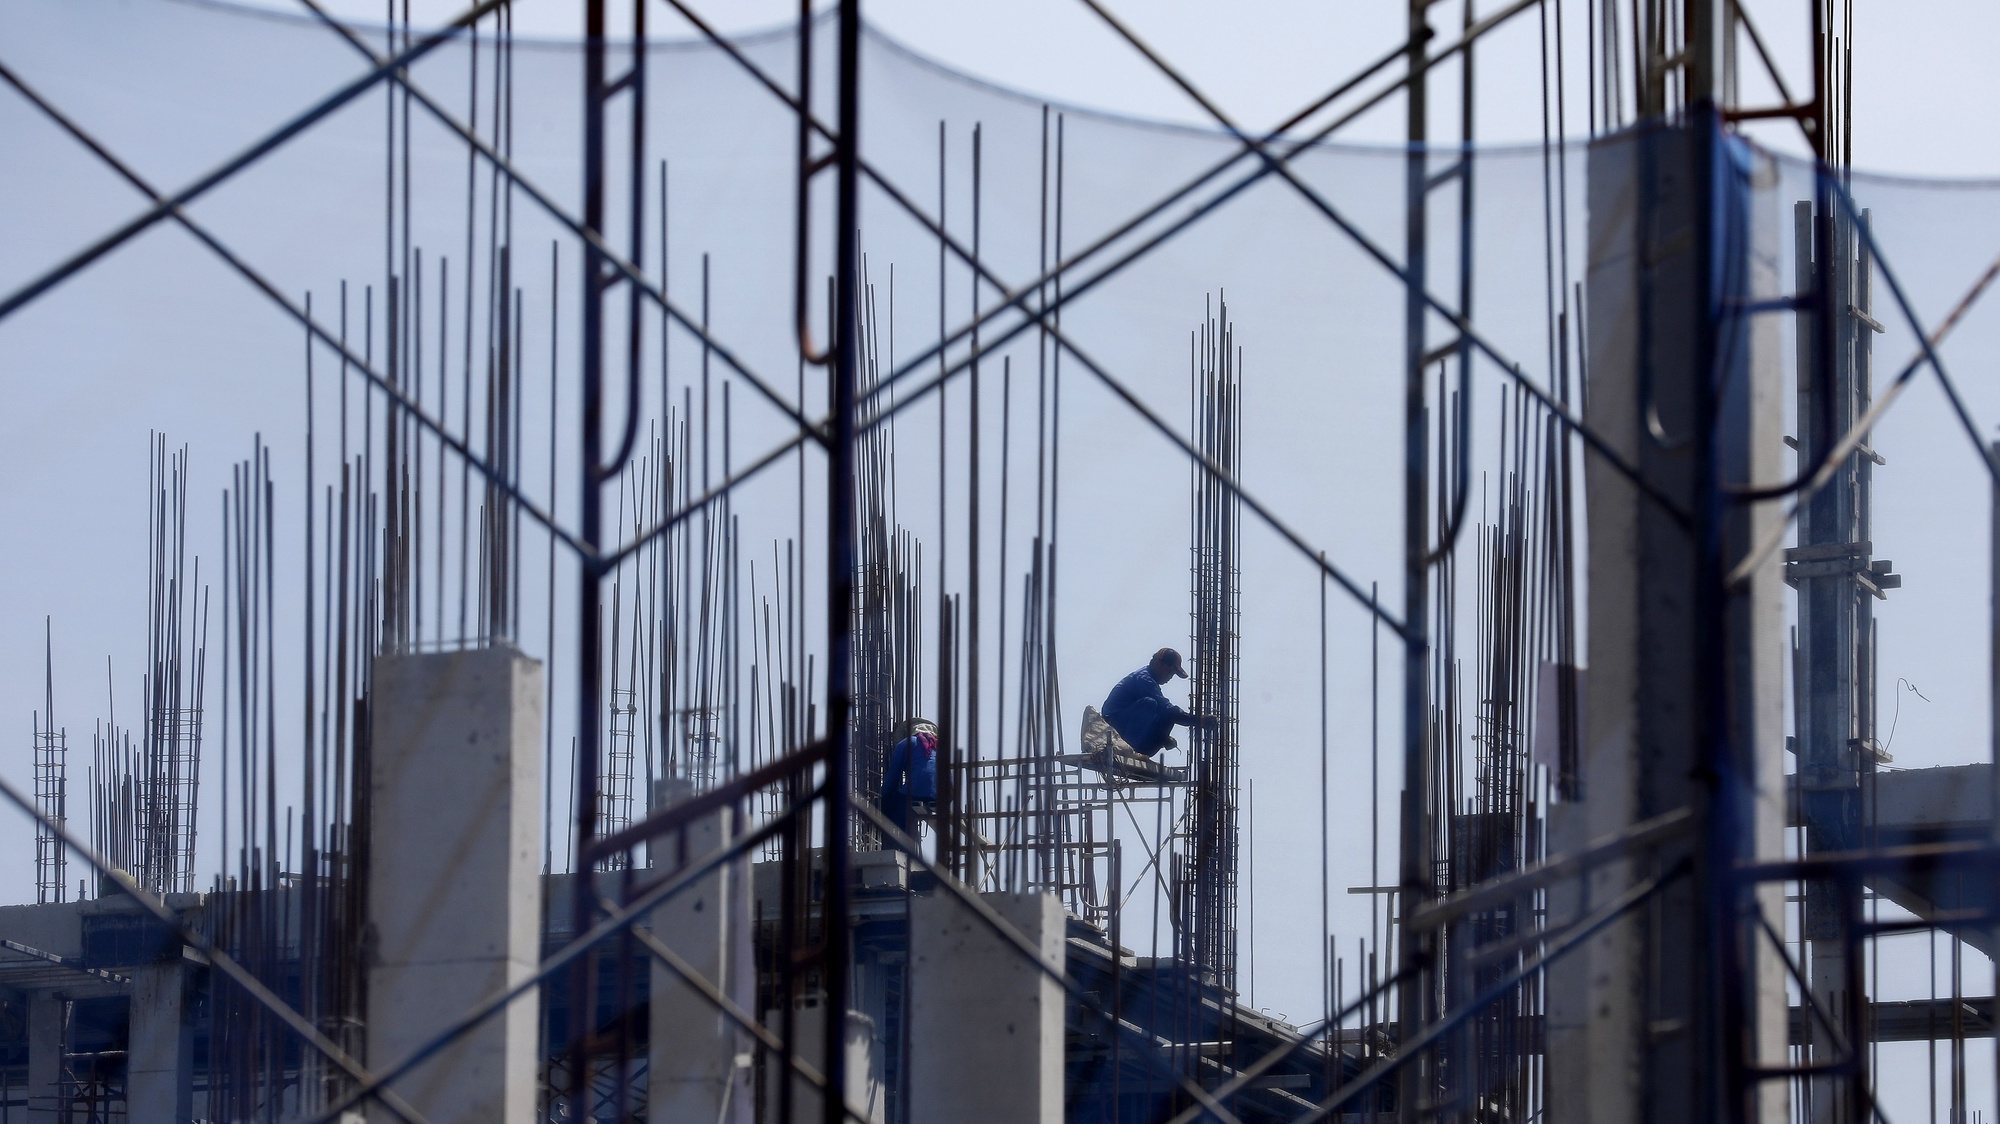 epa08534649 A laborer works at a construction site in Hanoi, Vietnam, 08 July 2020. Vietnam&#039;s GDP growth grew by 1.8 percent in the first half of 2020 due to the pandemic of the COVID-19 disease caused by the SARS-CoV-2 coronavirus, according to General Statistics Office (GSO).  EPA/LUONG THAI LINH